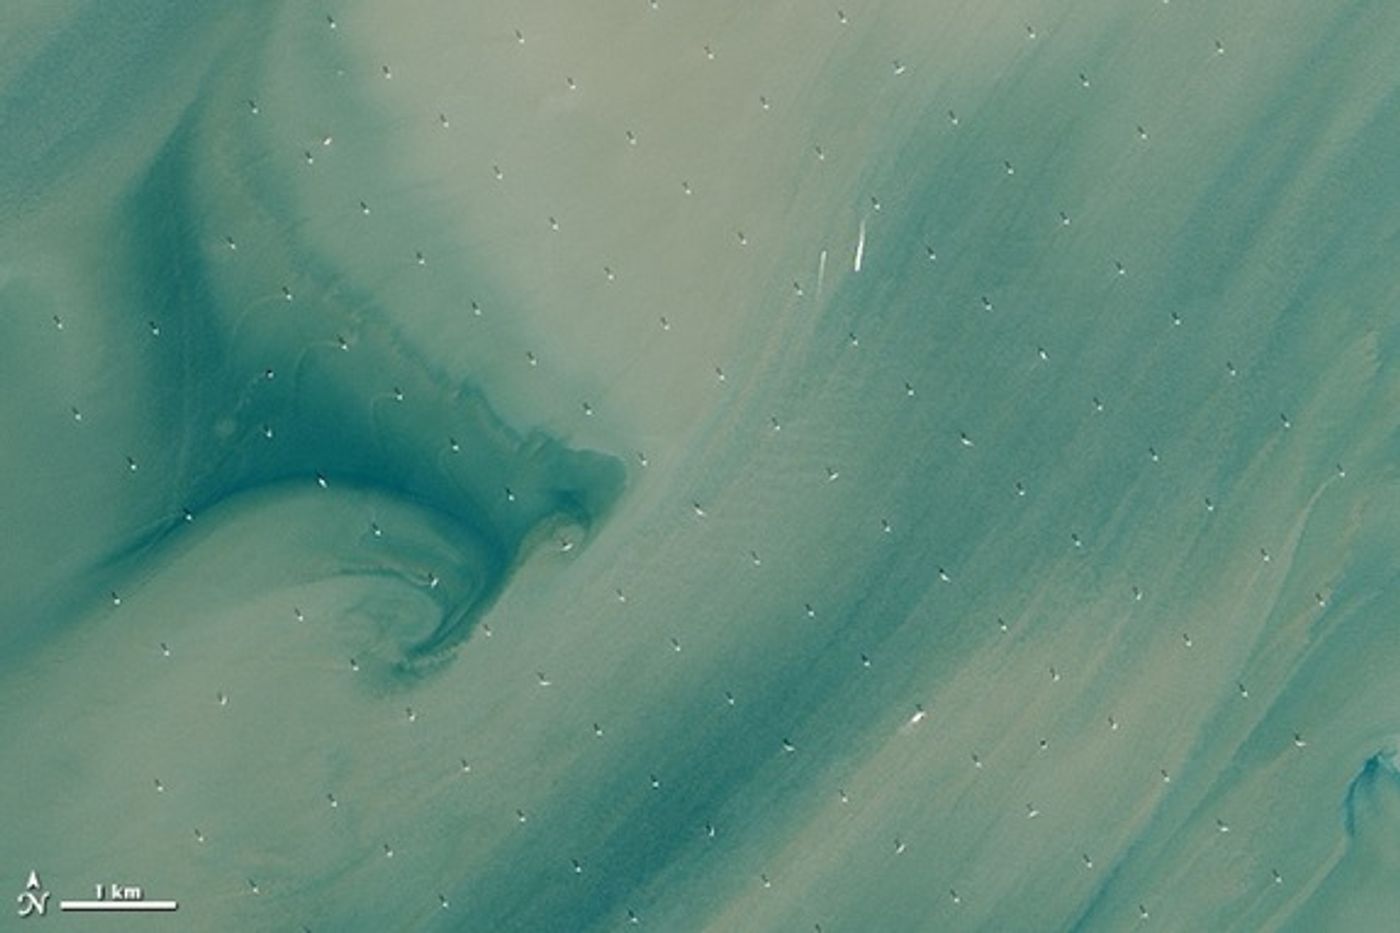 The world's largest offshore wind farm captured by the Landsat 8 satellite.  The white dots are the turbines.